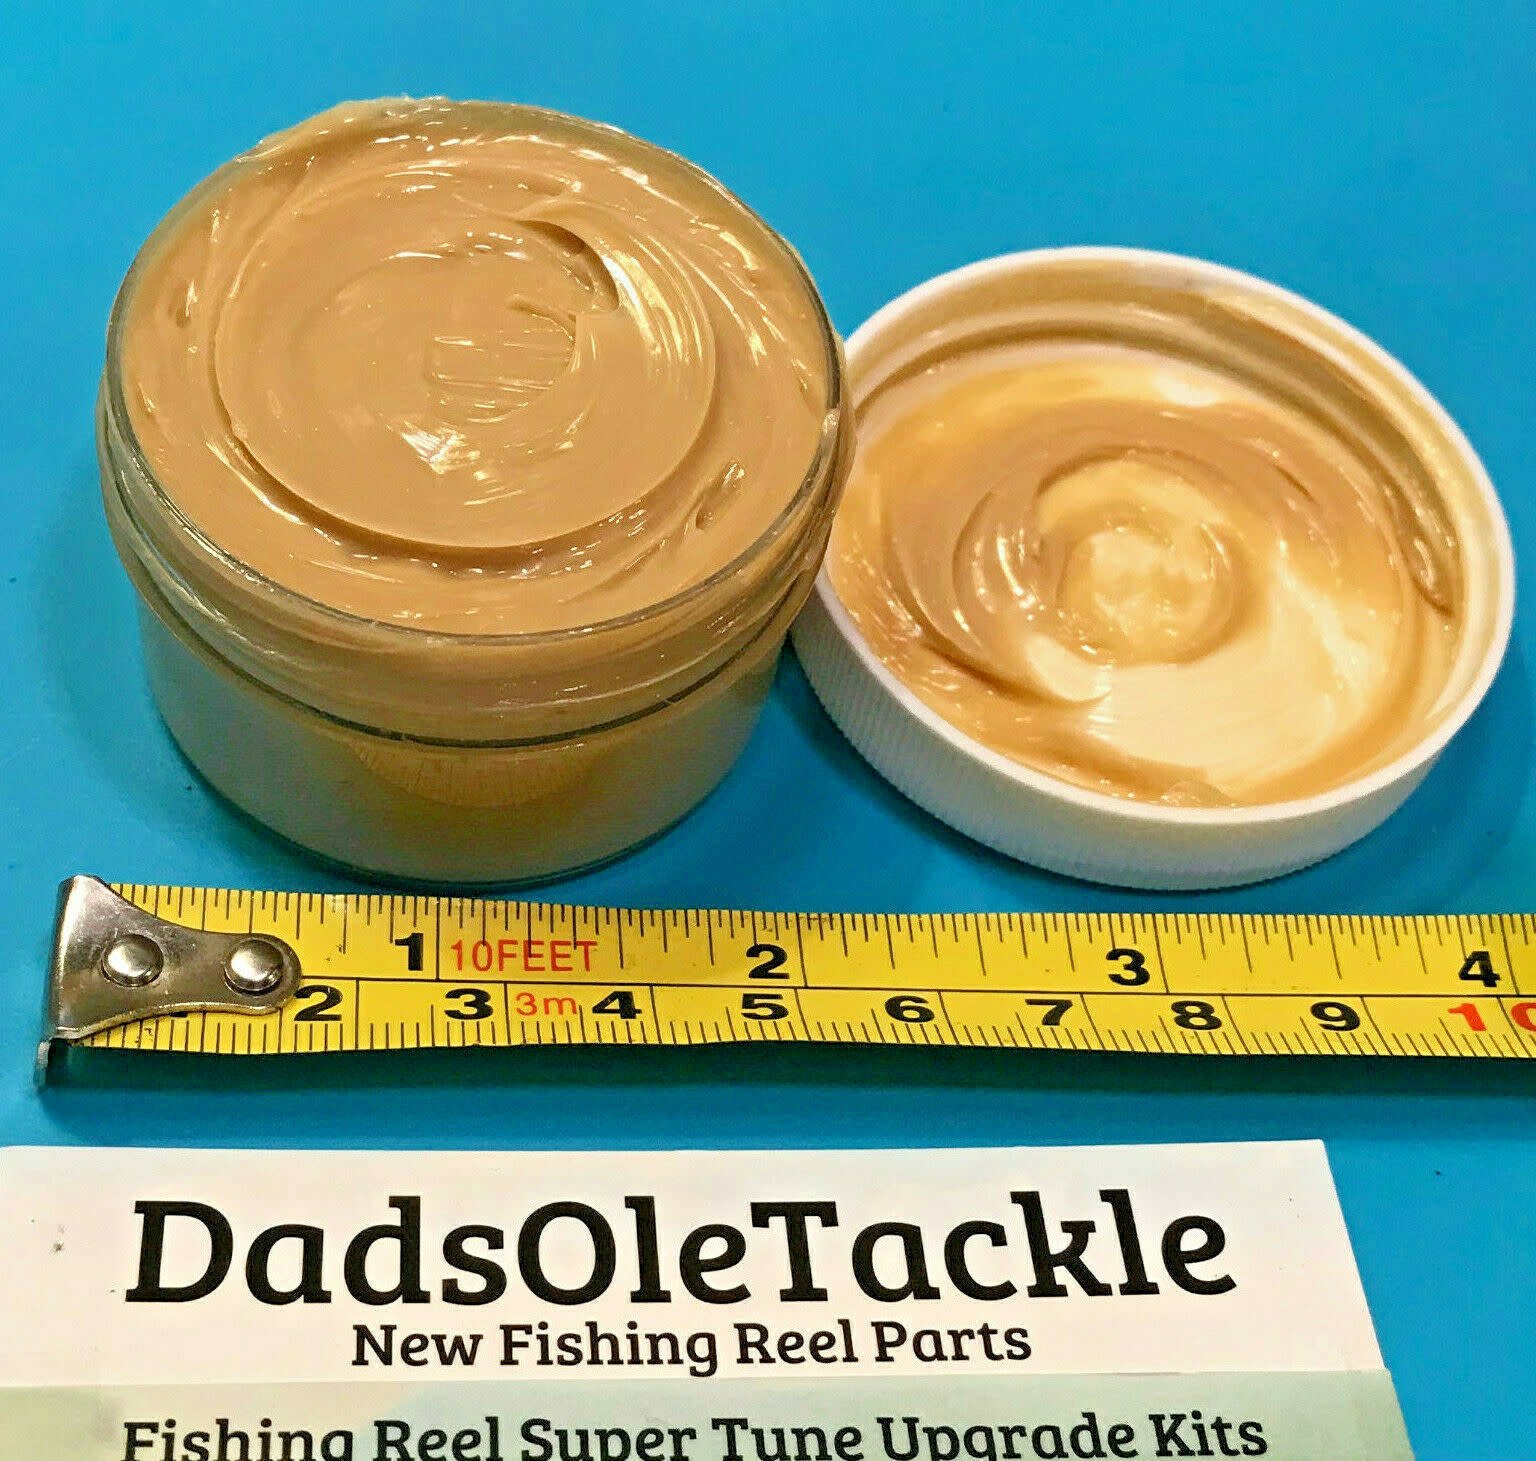 2 ounces of Cal's Tan Universal Reel & Star Drag Grease. Comes in